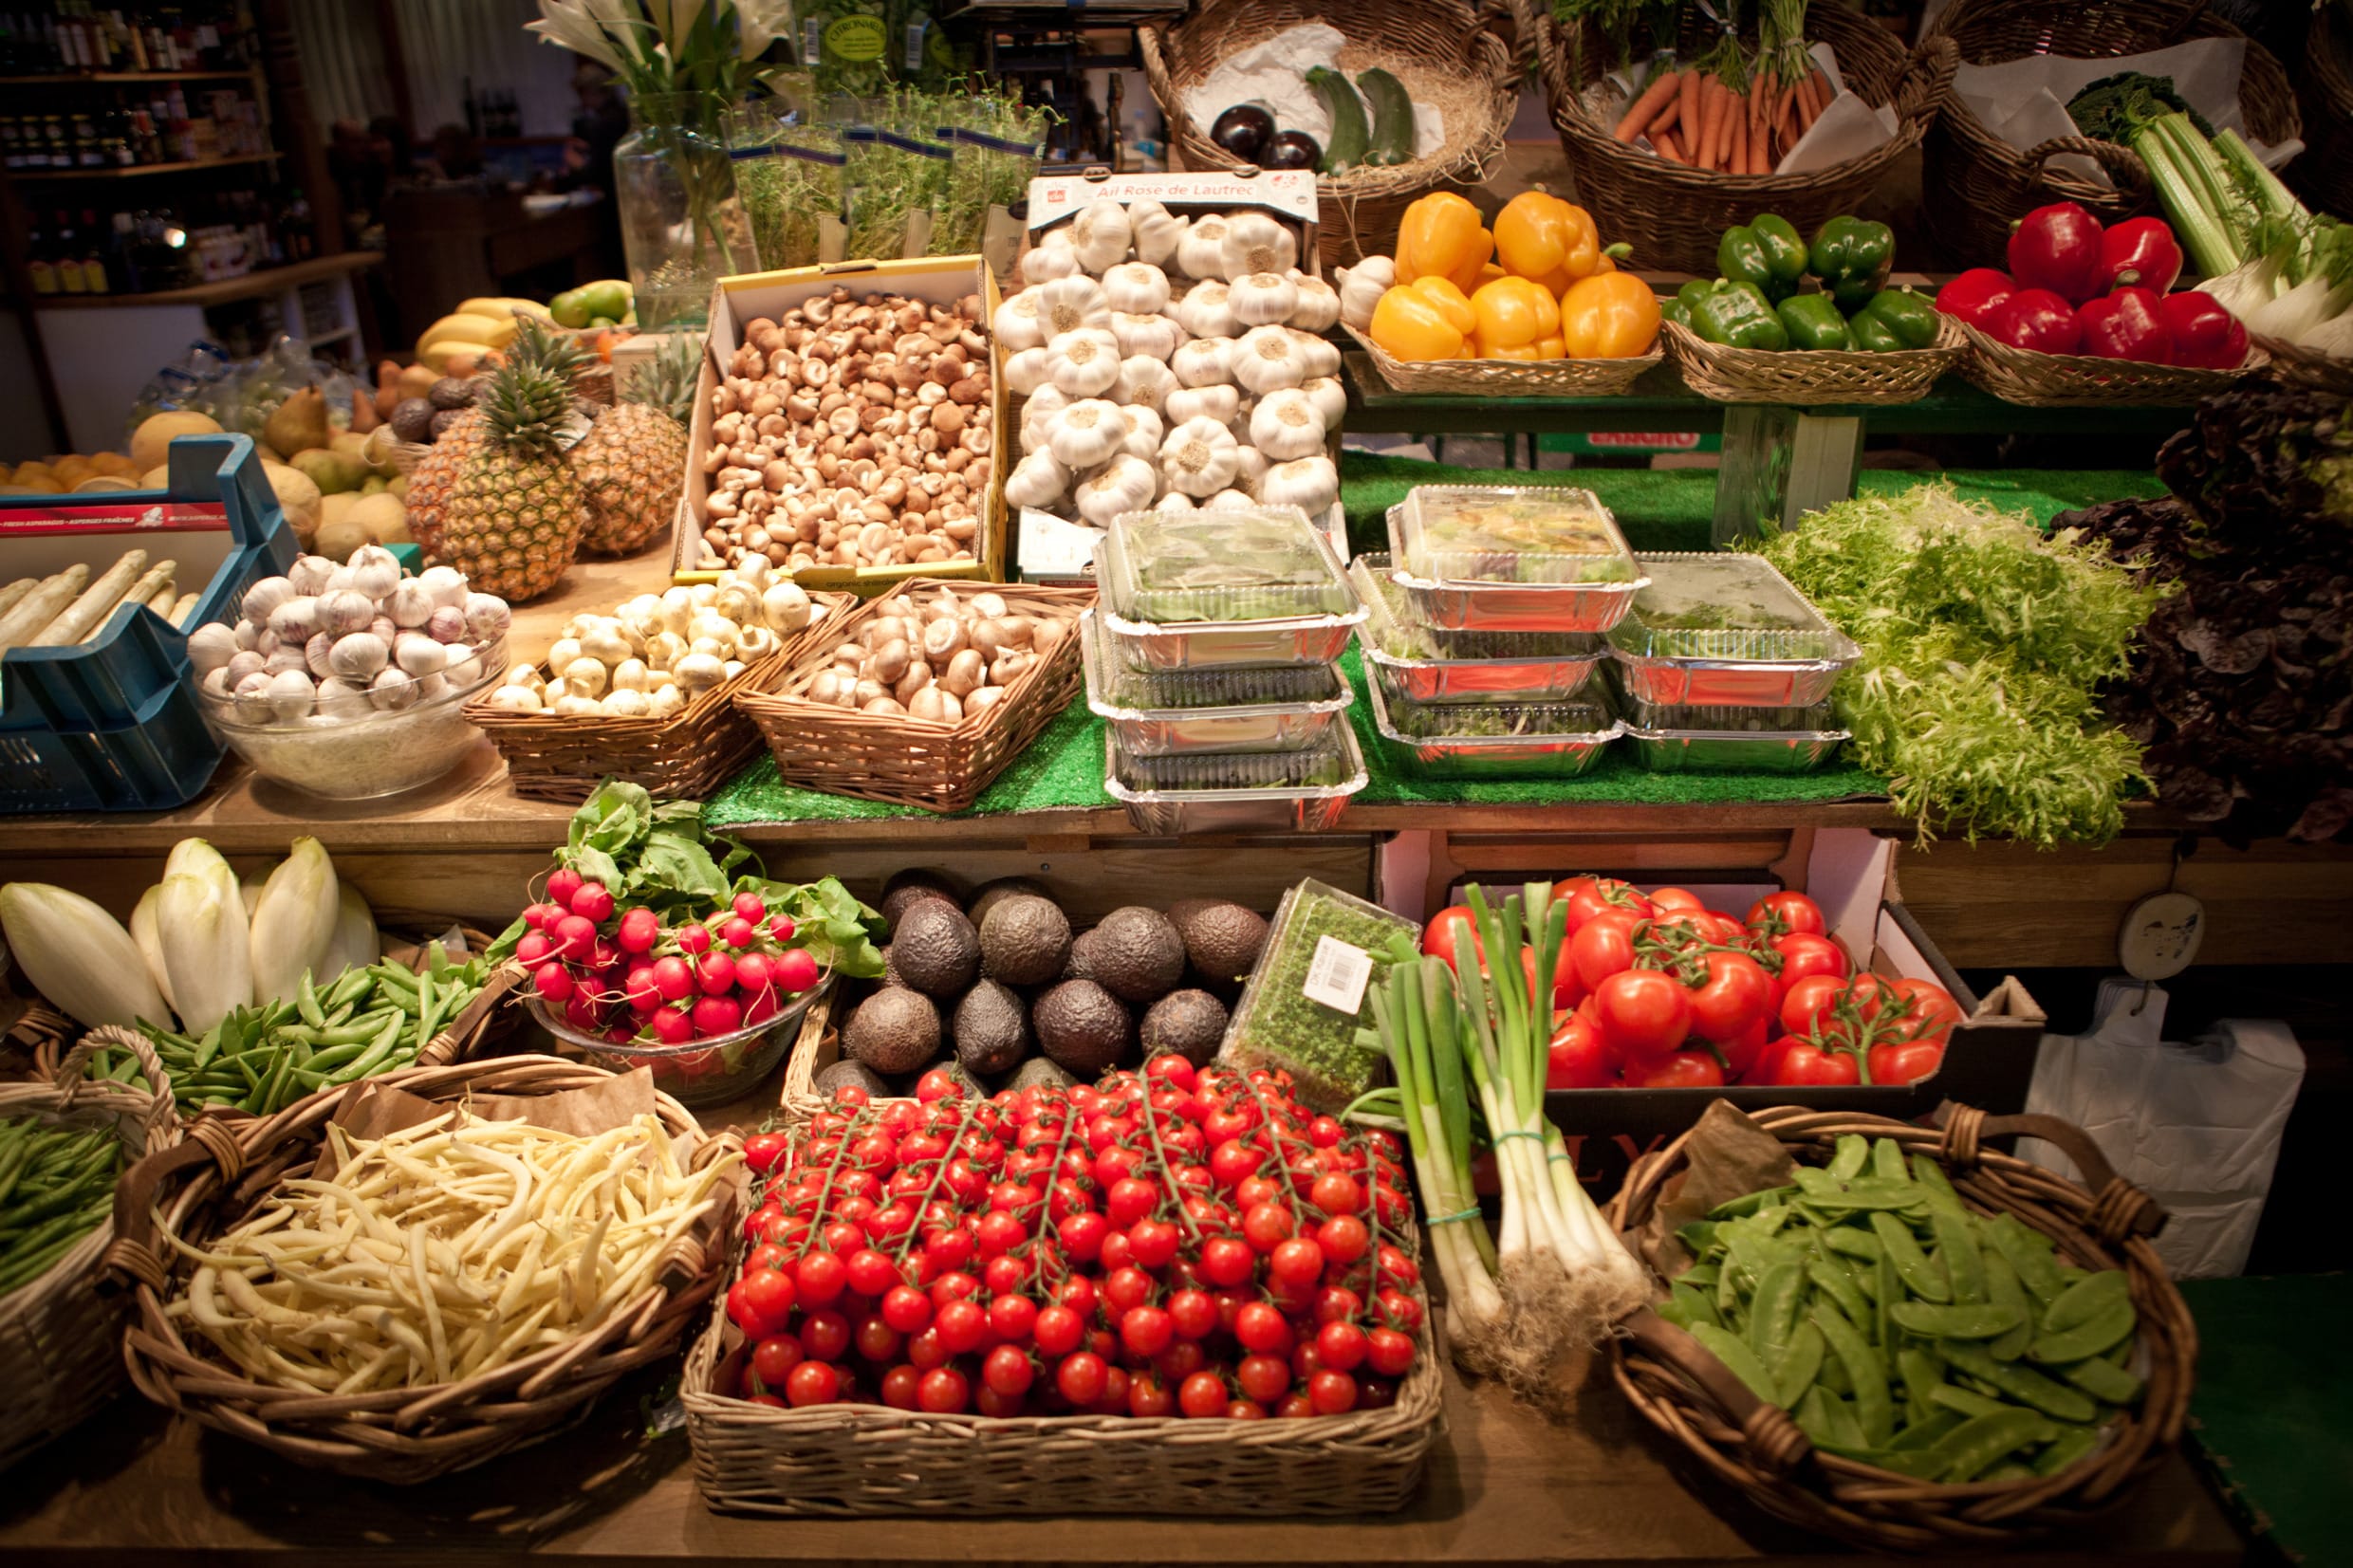 Fresh Produce at a Market Hall in Sweden.